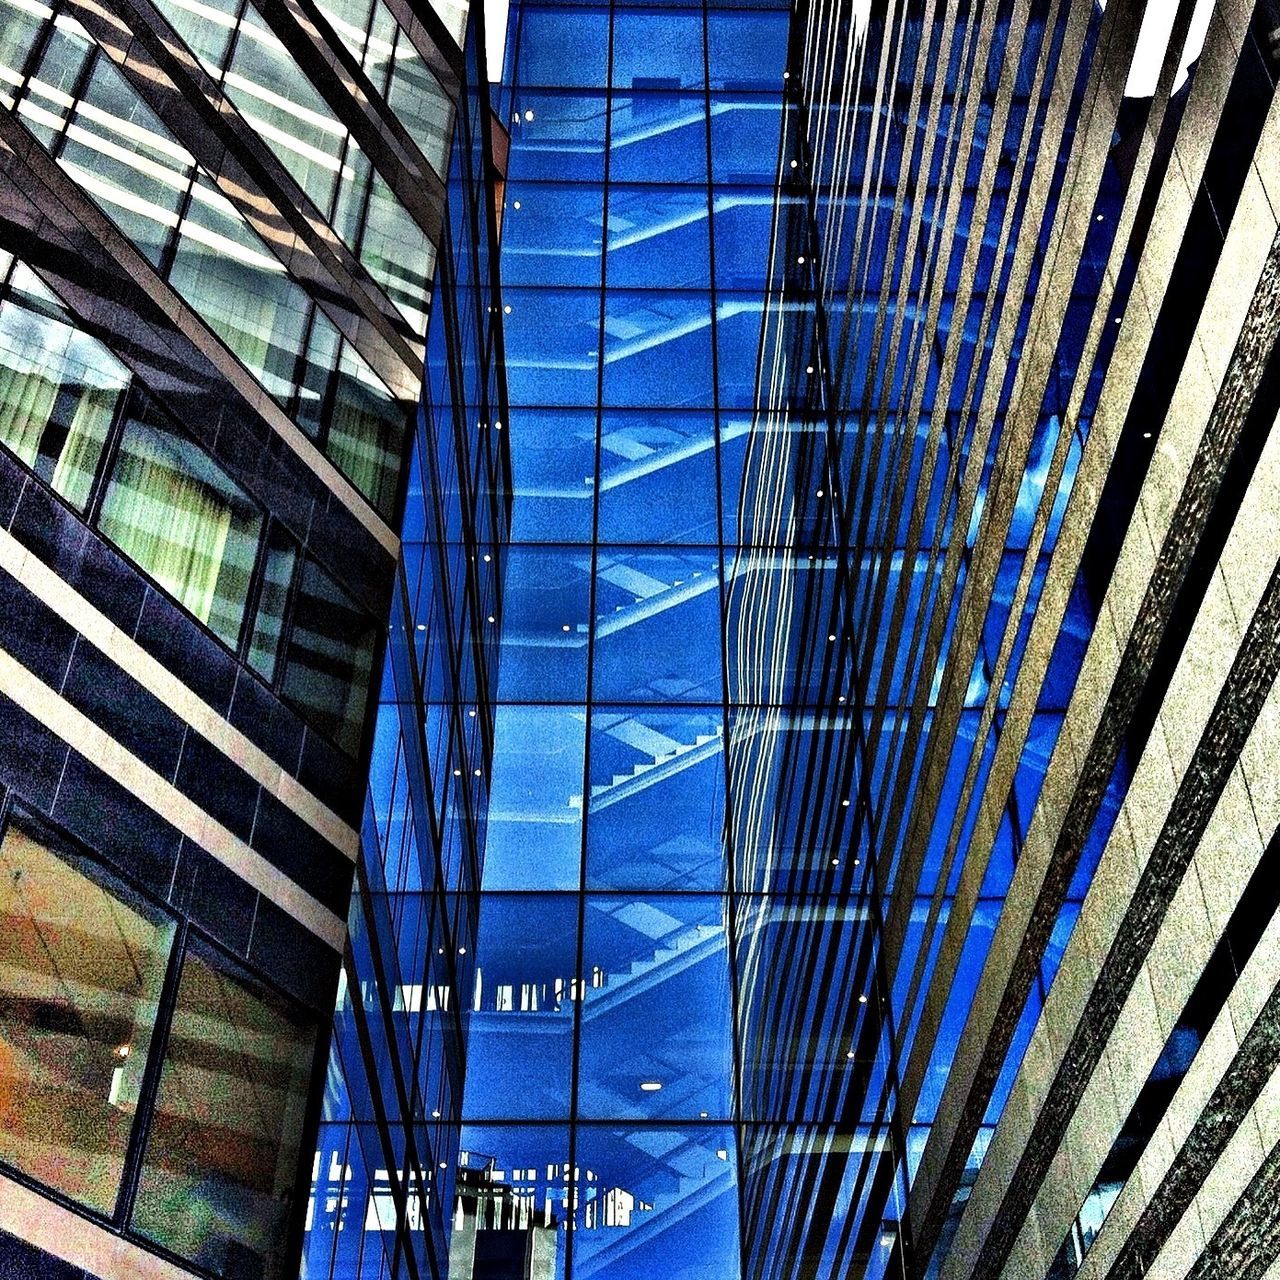 architecture, built structure, low angle view, modern, building exterior, glass - material, blue, pattern, office building, city, full frame, building, reflection, day, backgrounds, architectural feature, grid, no people, tall - high, ceiling